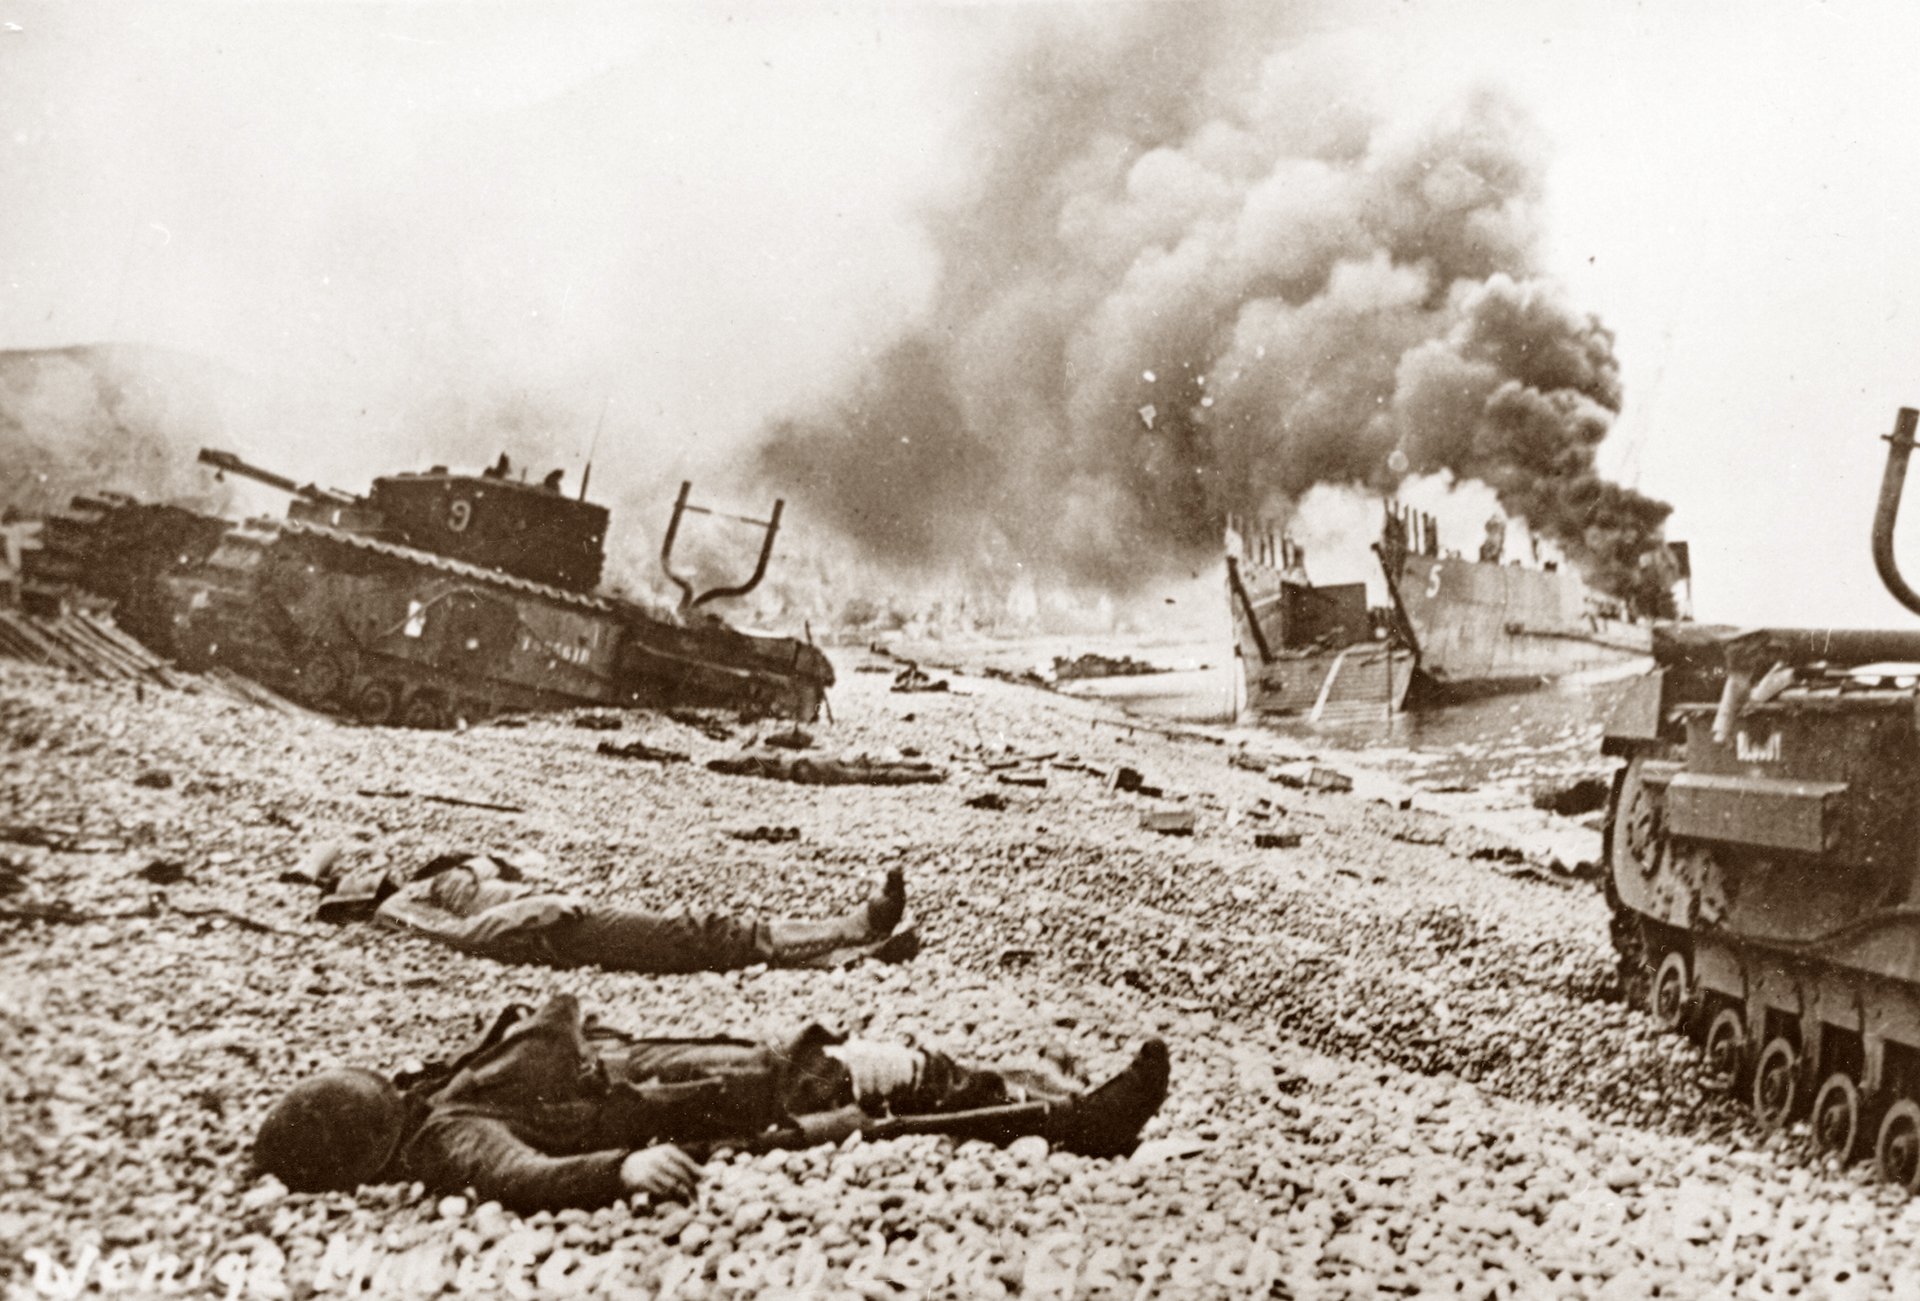 A Landing Craft, Tank (LCT) TLC5 No. 121 aflame near the shore following the Allied raid, primarily involving Canadian forces, against German defences. Images depict Churchill tanks and fallen Allied servicemen on the beach, with one tank on the left belonging to 9 Troop, 14th Army Tank Battalion (The Calgary Regiment (Tank)), carried by TLC5 on 19 August 1942.